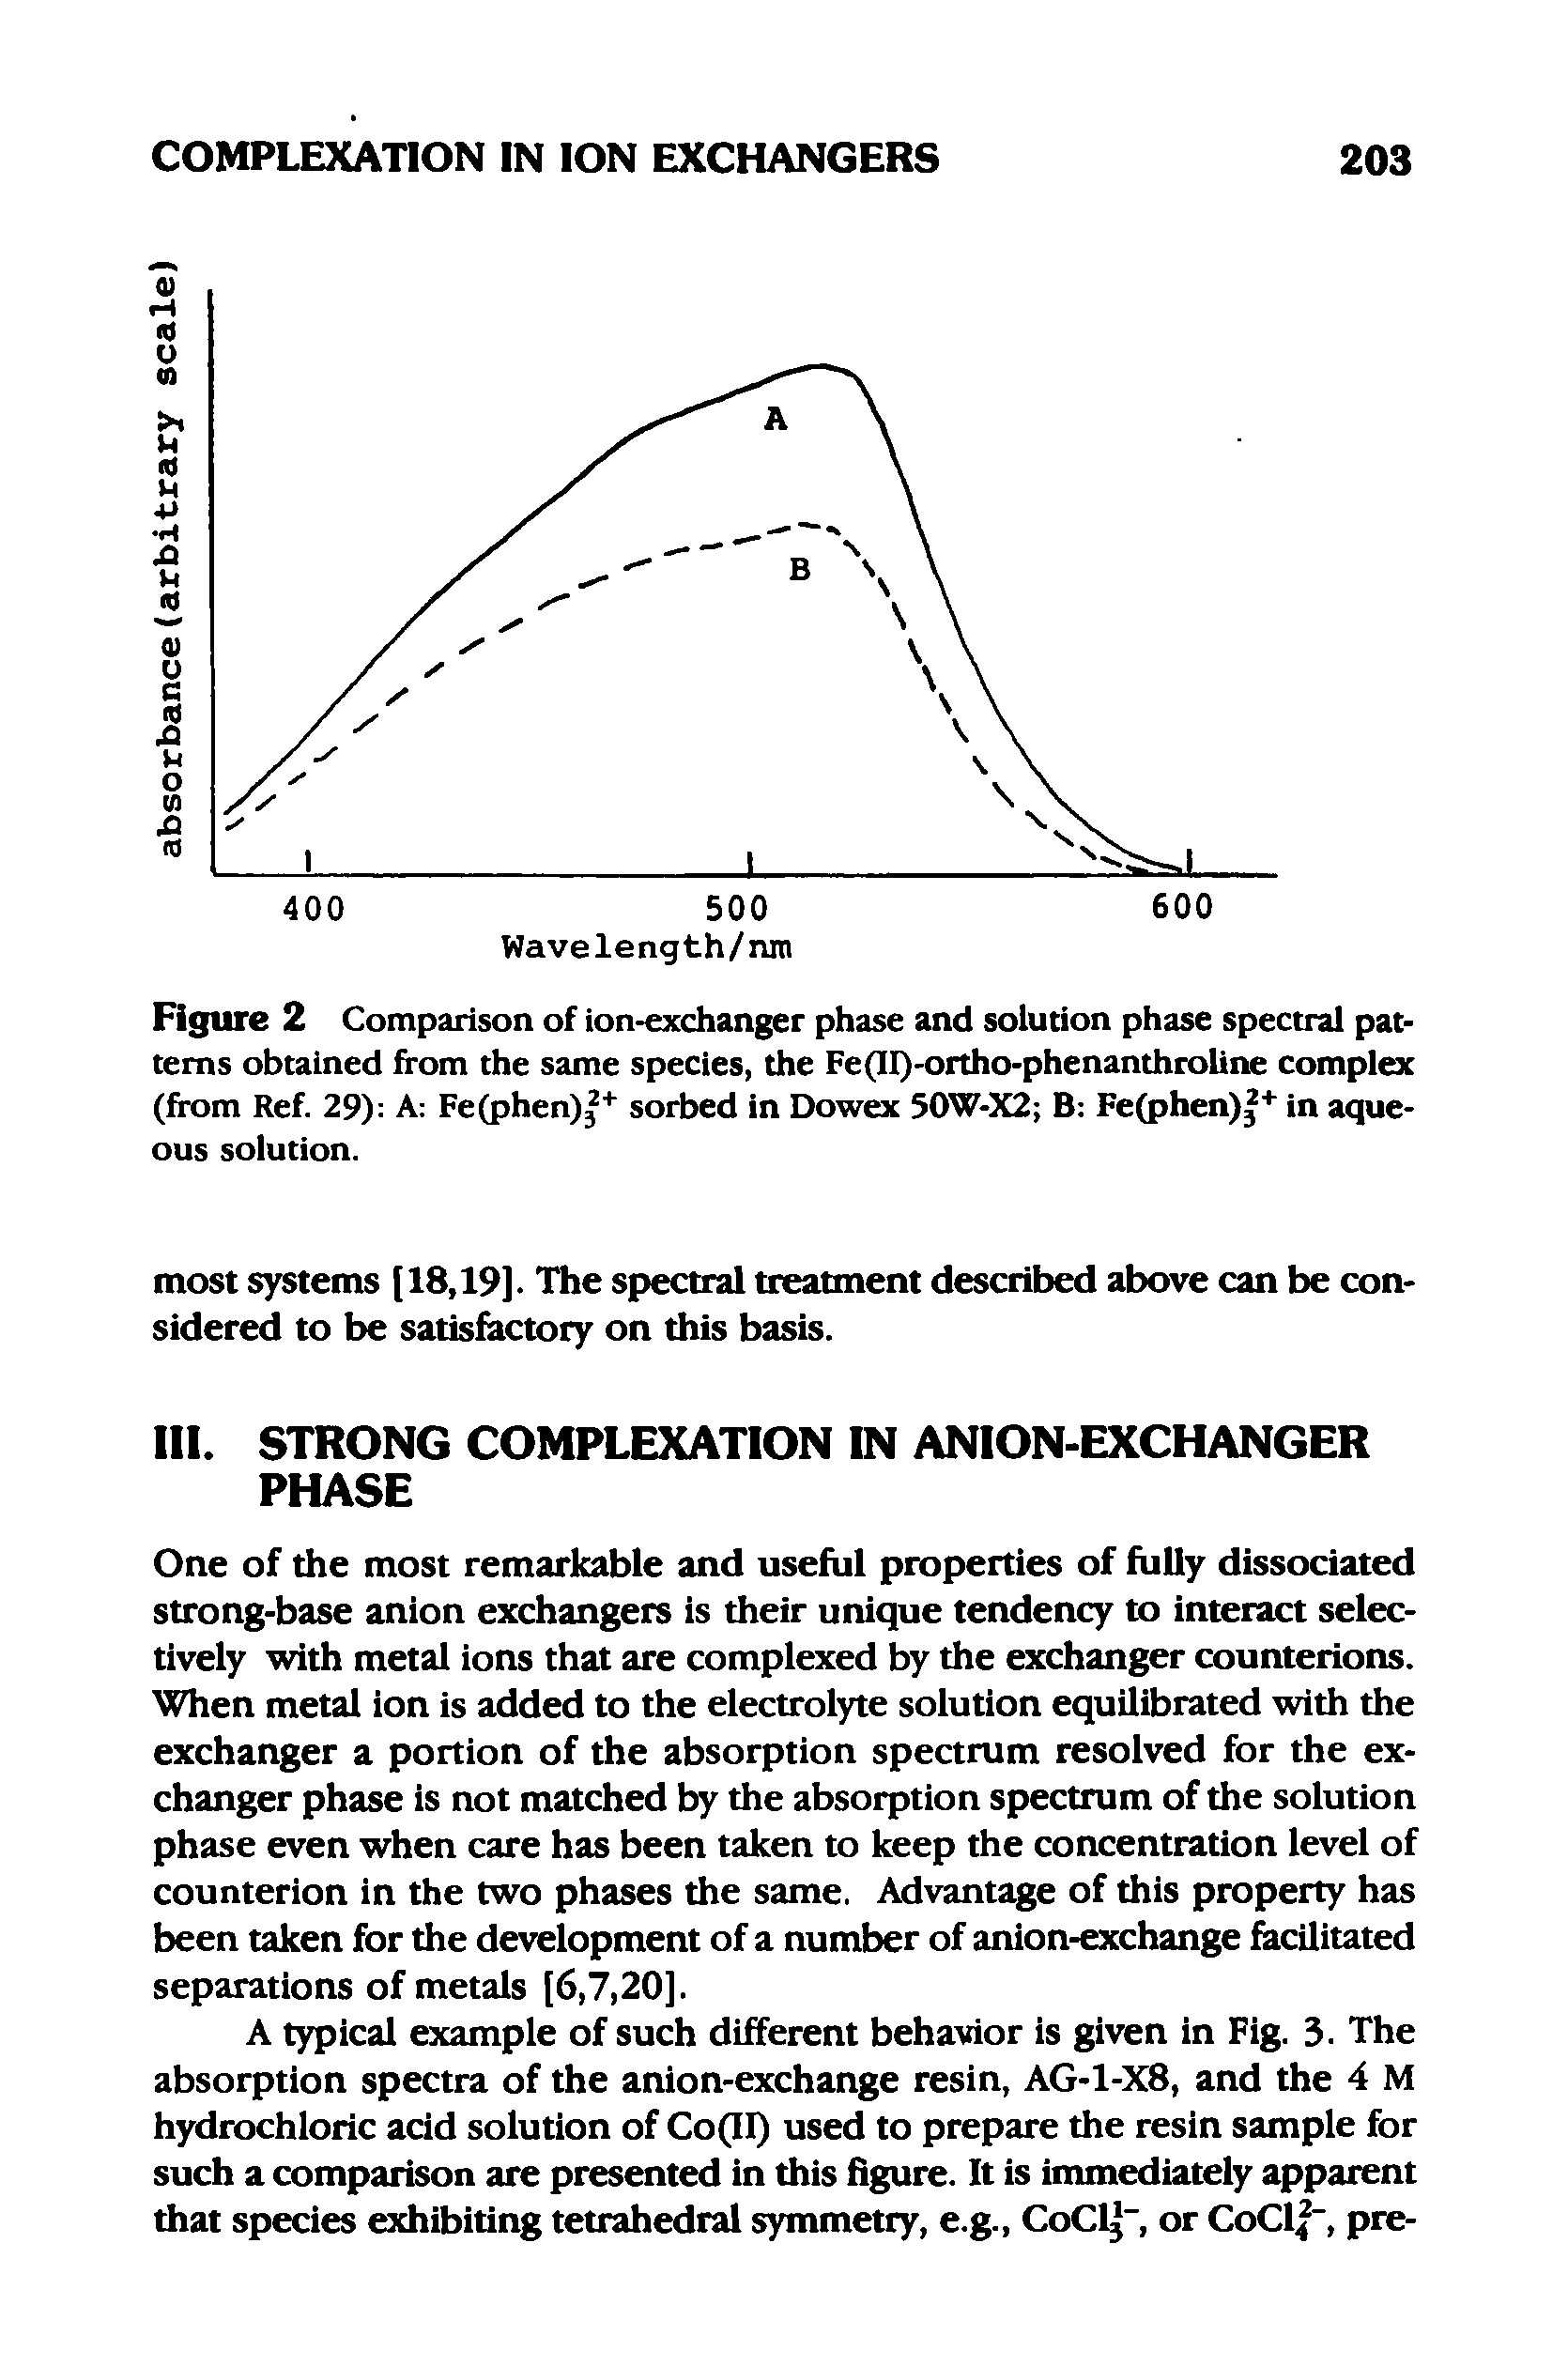 Figure 2 Comparison of ion-exchanger phase and solution phase spectral patterns obtained from the same species, the Fe(II)-ortho-phenanthroline complex (from Ref. 29) A Fe(phen)3 sorbed in Dowex 50W-X2 B Fe(phen) in aqueous solution.